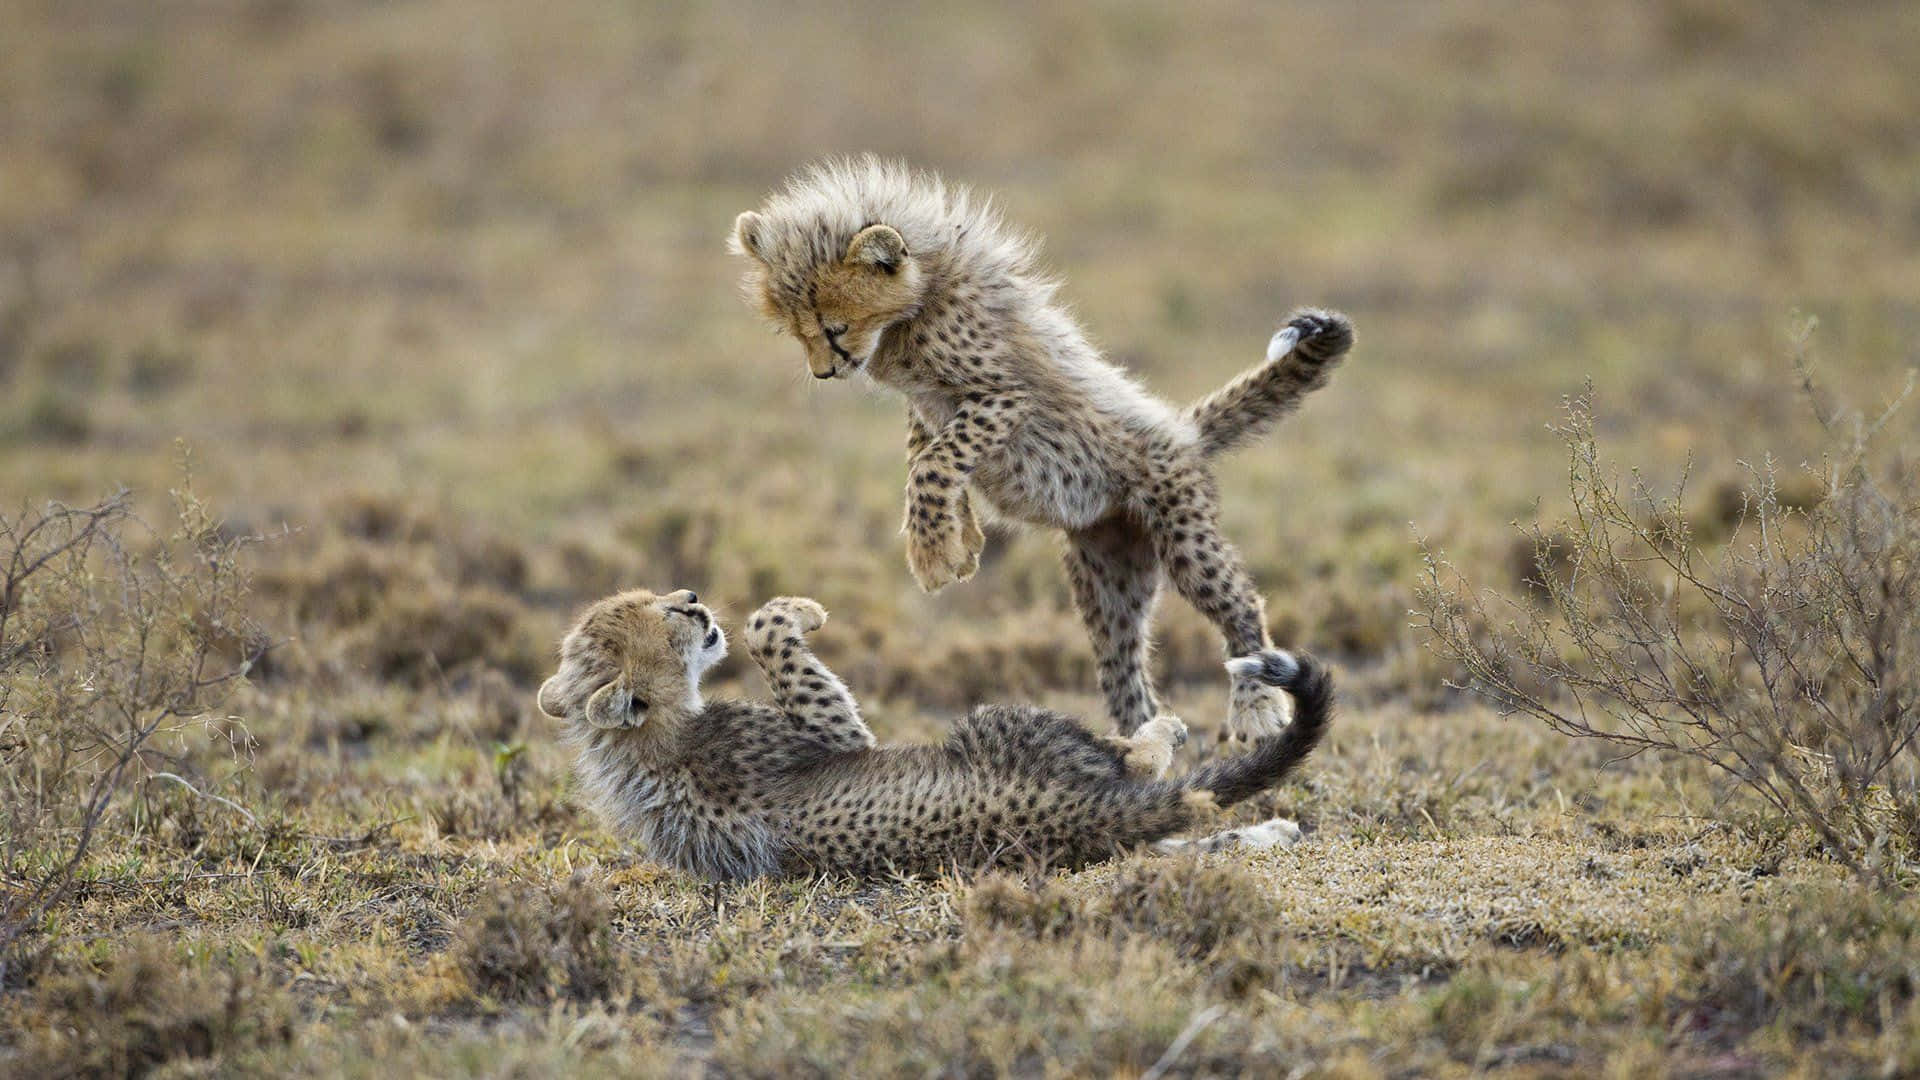 A cheetah, fast and powerful